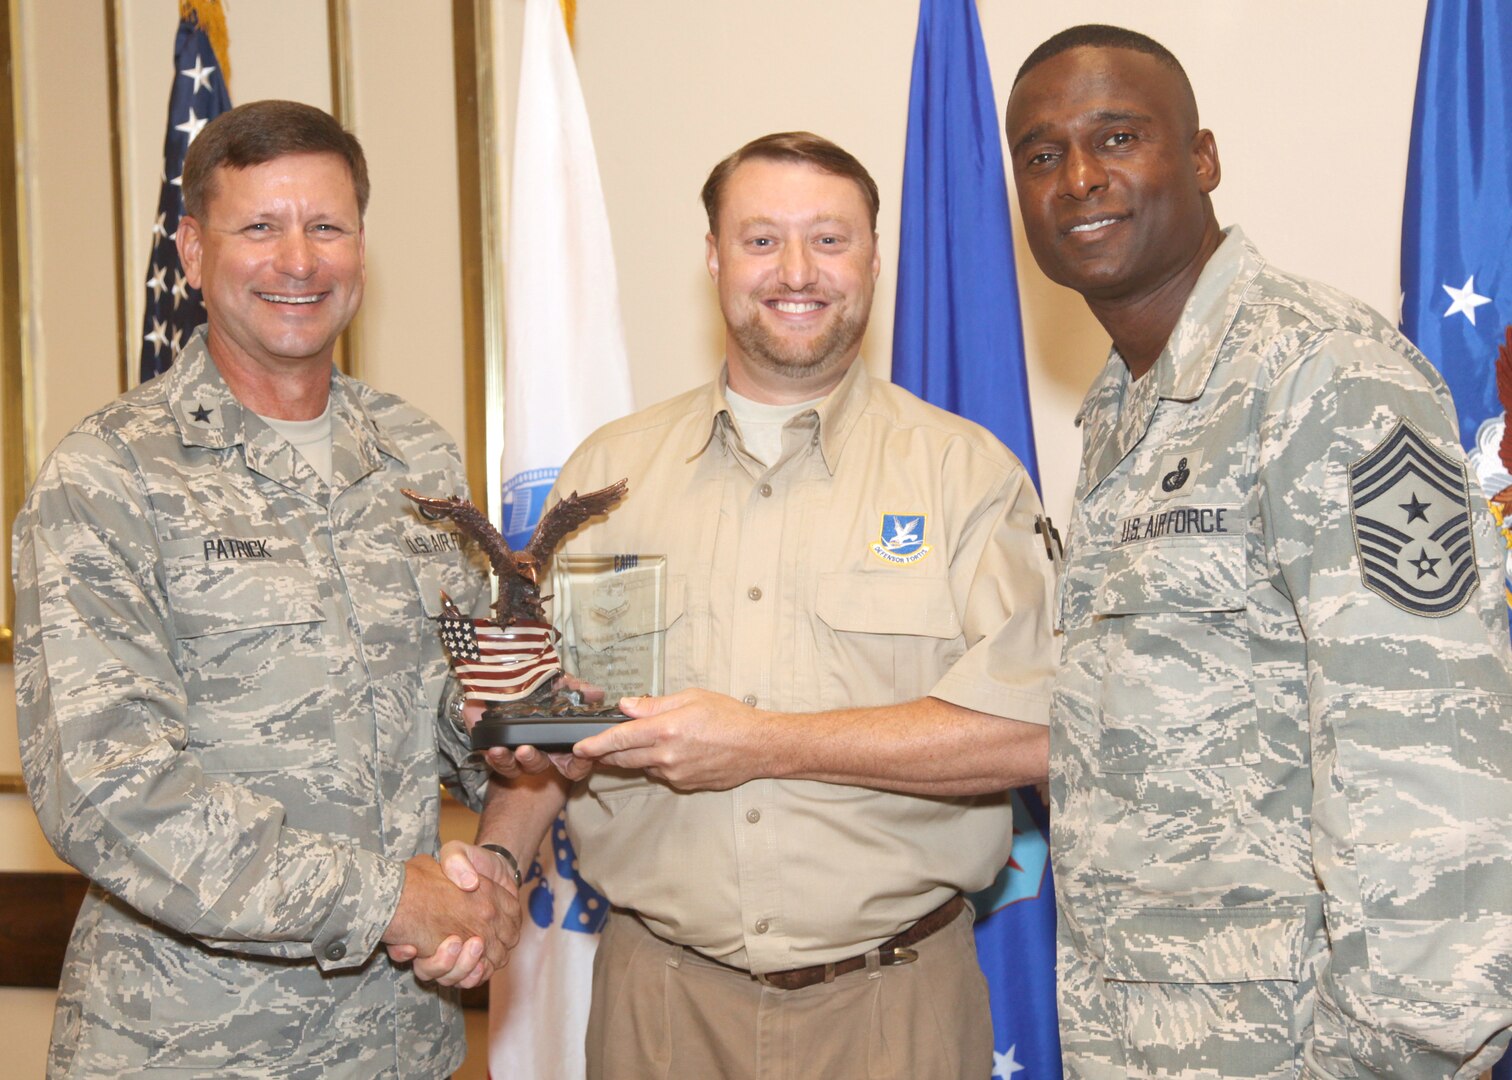 Michael Carr receives the Civilian of the Quarter Category I award from Brig. Gen. Leonard Patrick, 502nd Air Base Wing commander, and Chief Master Sgt. Juan Lewis, 502nd ABW command chief, during the 502nd ABW second quarter awards luncheon July 27 at the Kelly Club. Mr. Carr is with the 802nd Security Forces Squadron. (U.S. Air Force photo/Robbin Cresswell)